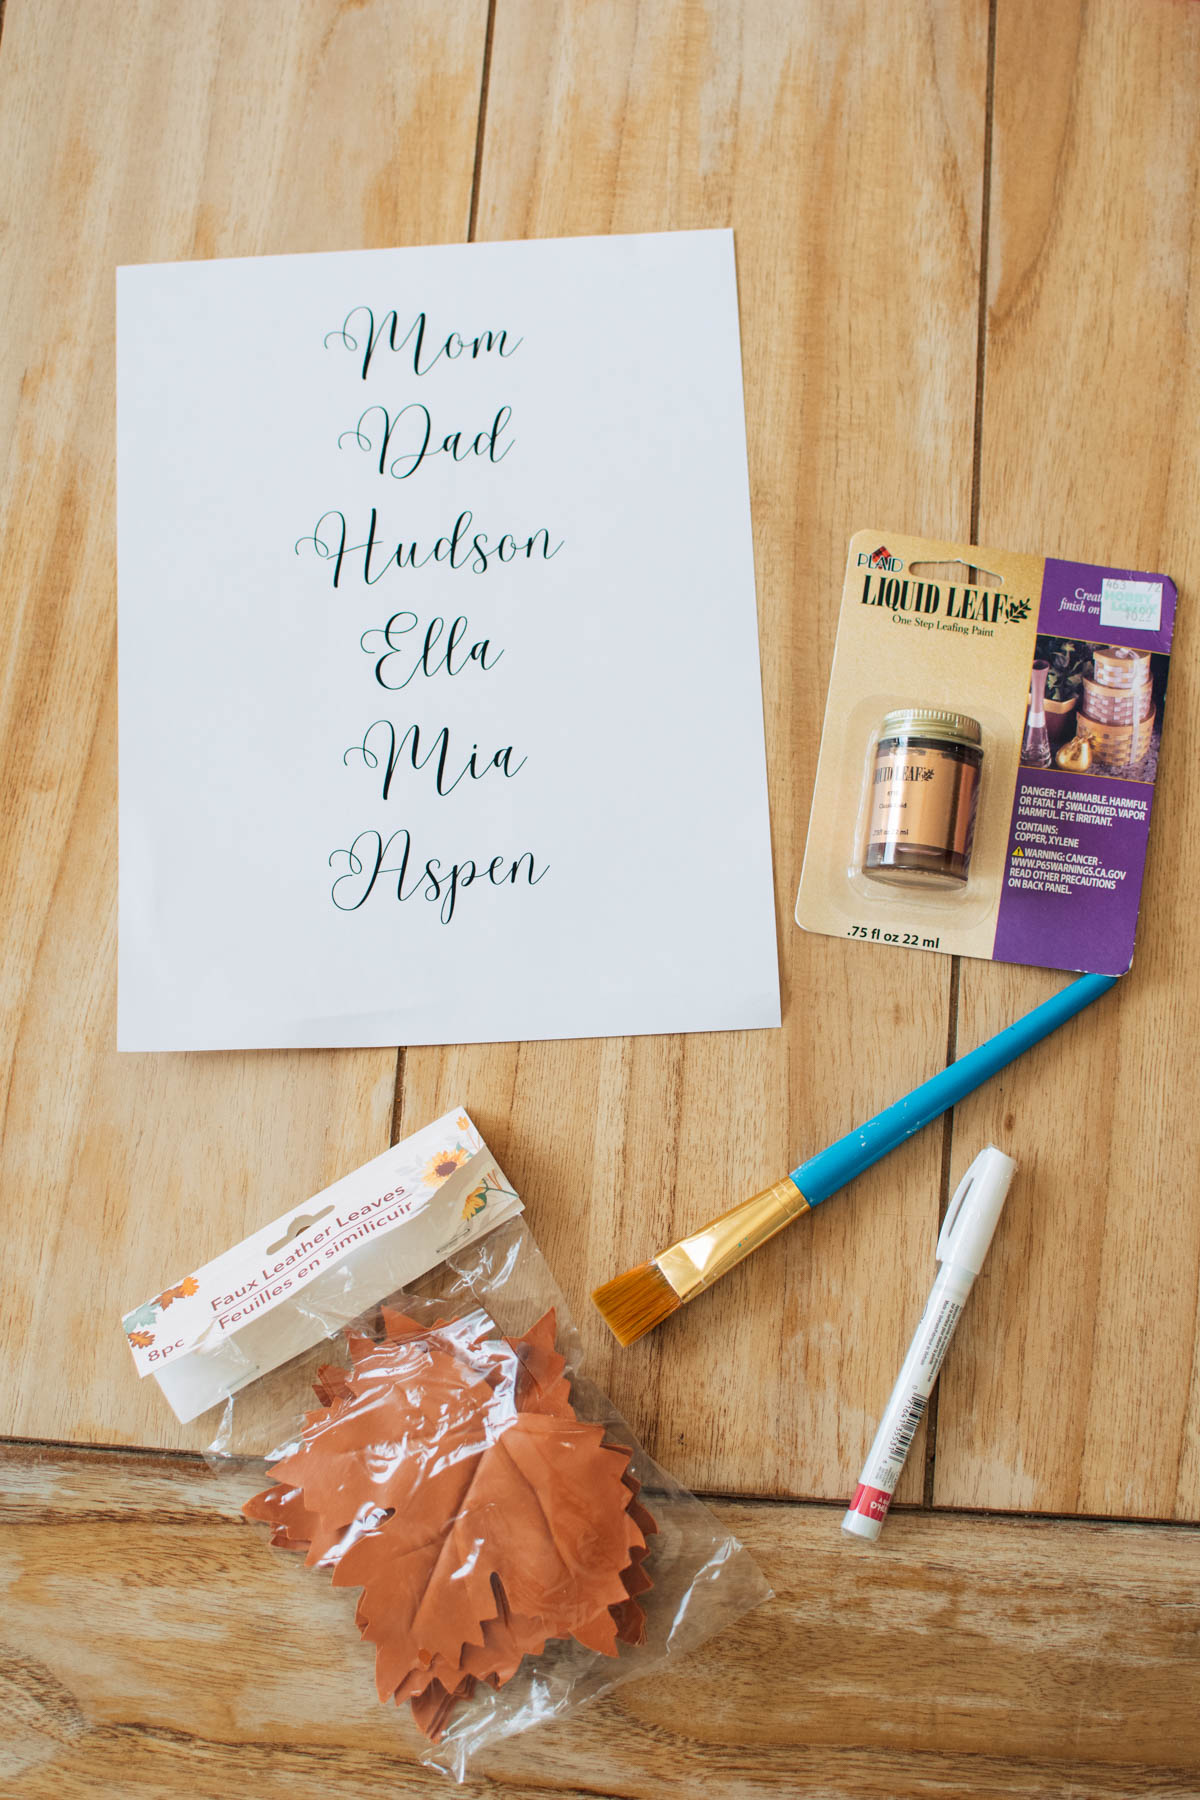 DIY leaf place card supplies on table including liquid leaf, paintbrush, and marker.